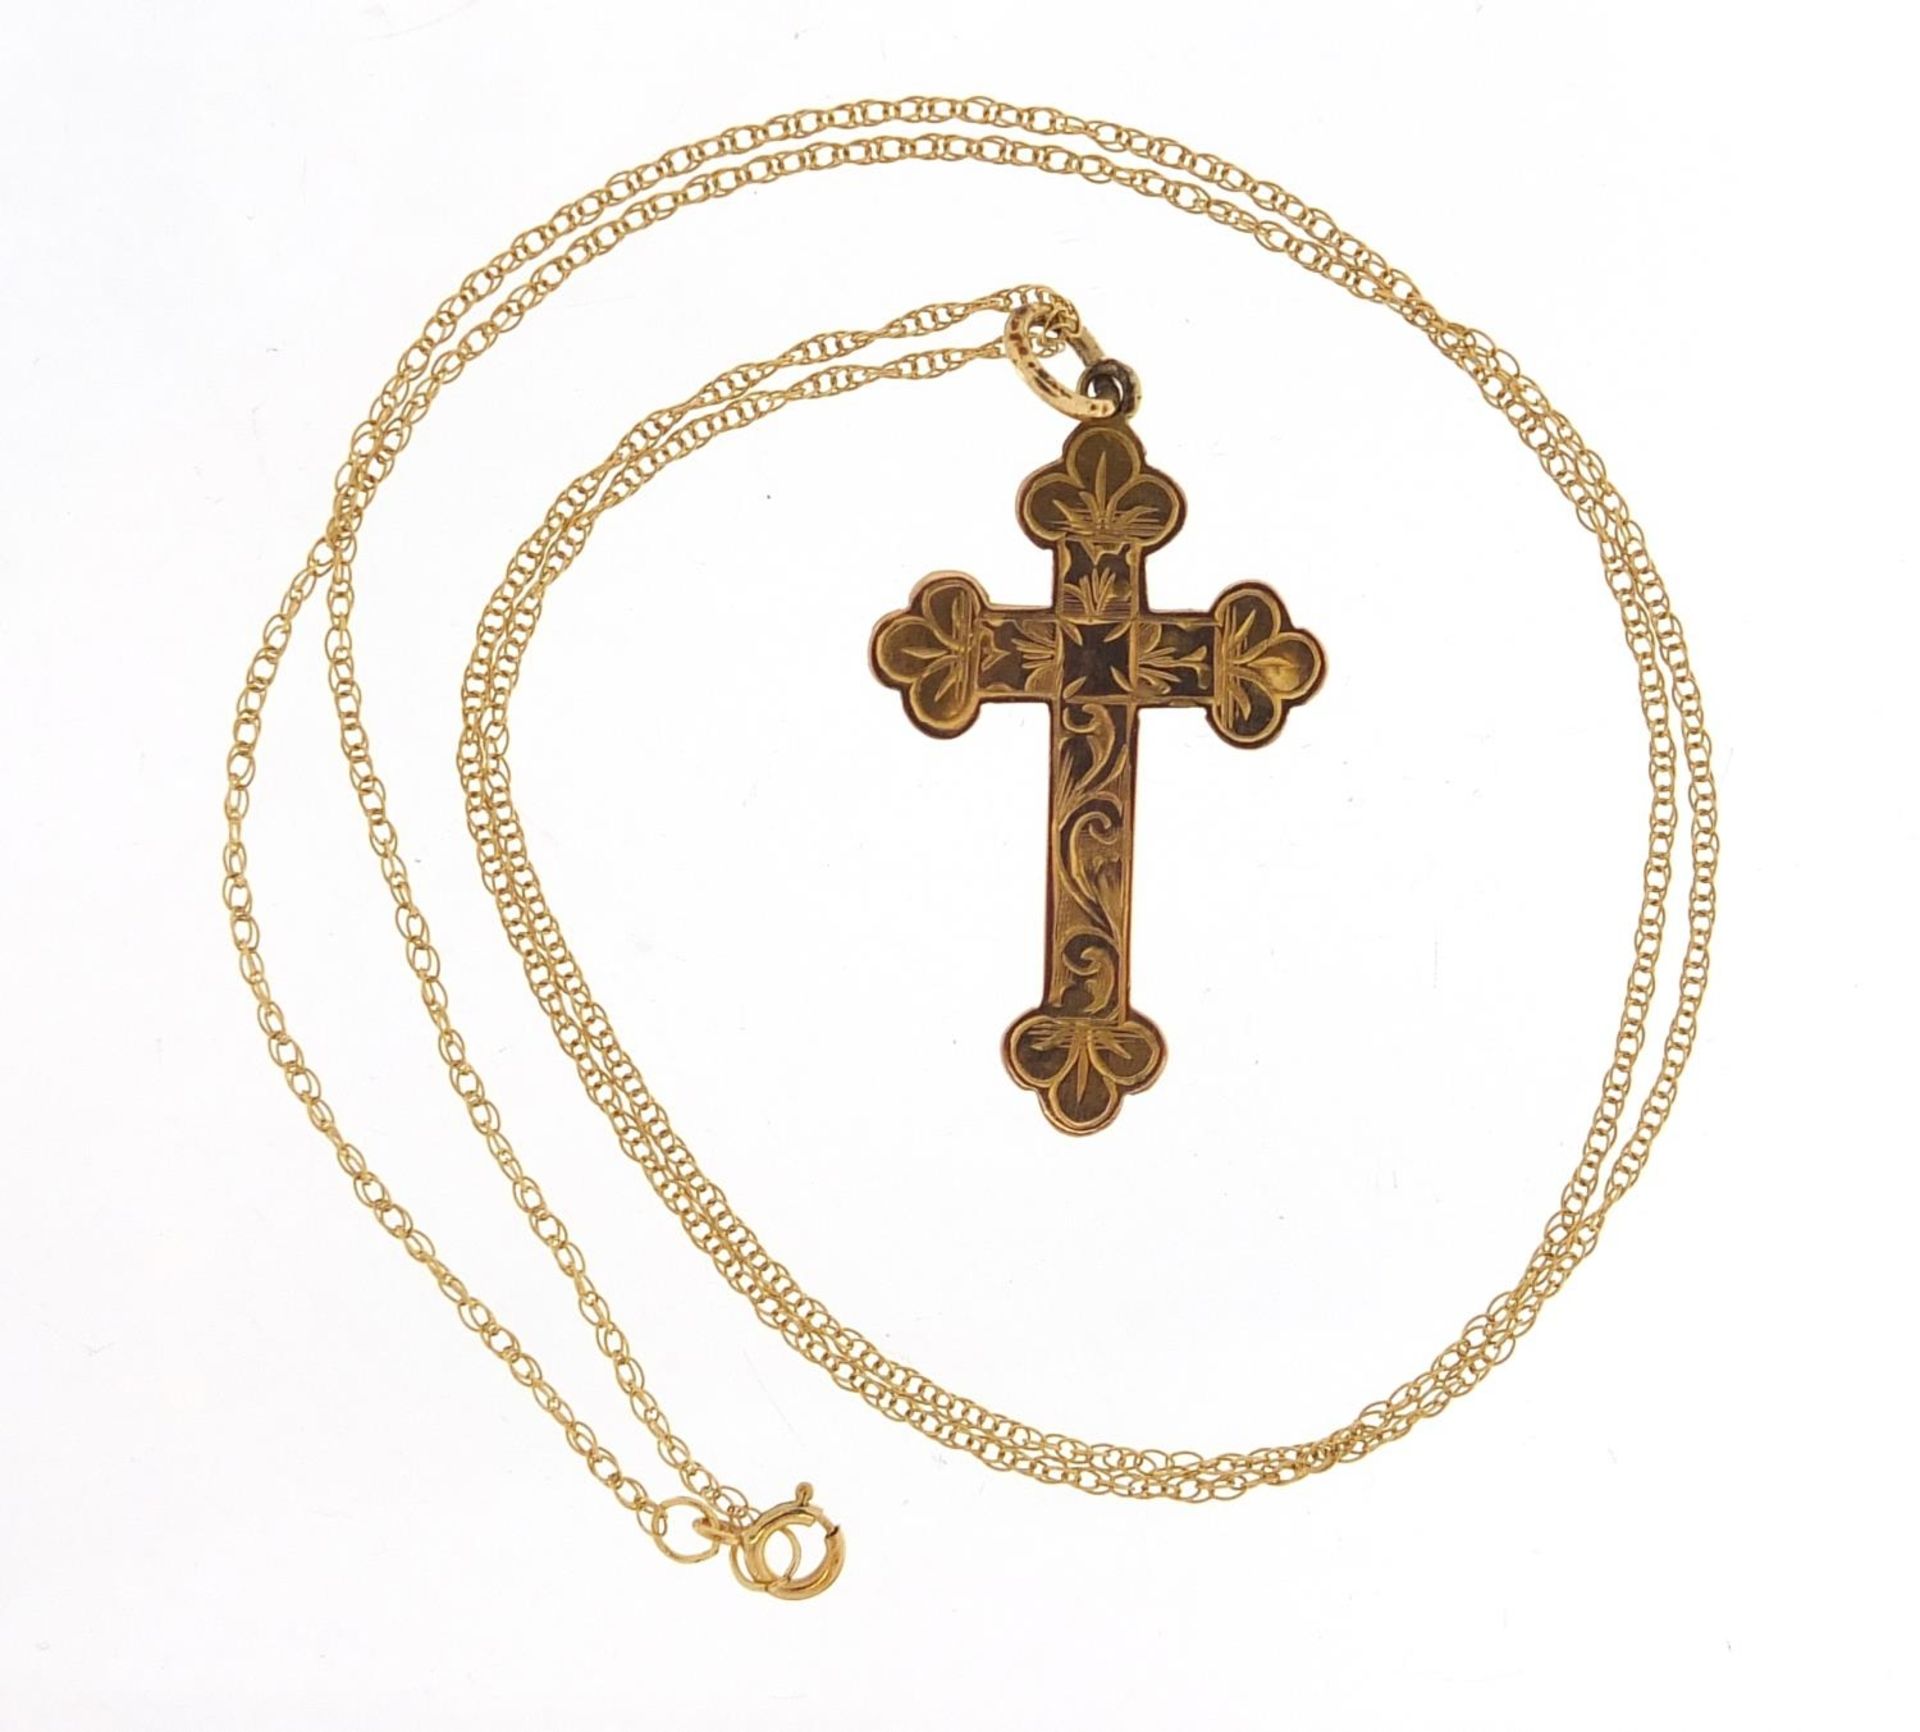 9ct gold engraved cross pendant on a 9ct gold necklace, 3.3cm high and 47cm in length, 1.4g - Image 2 of 4